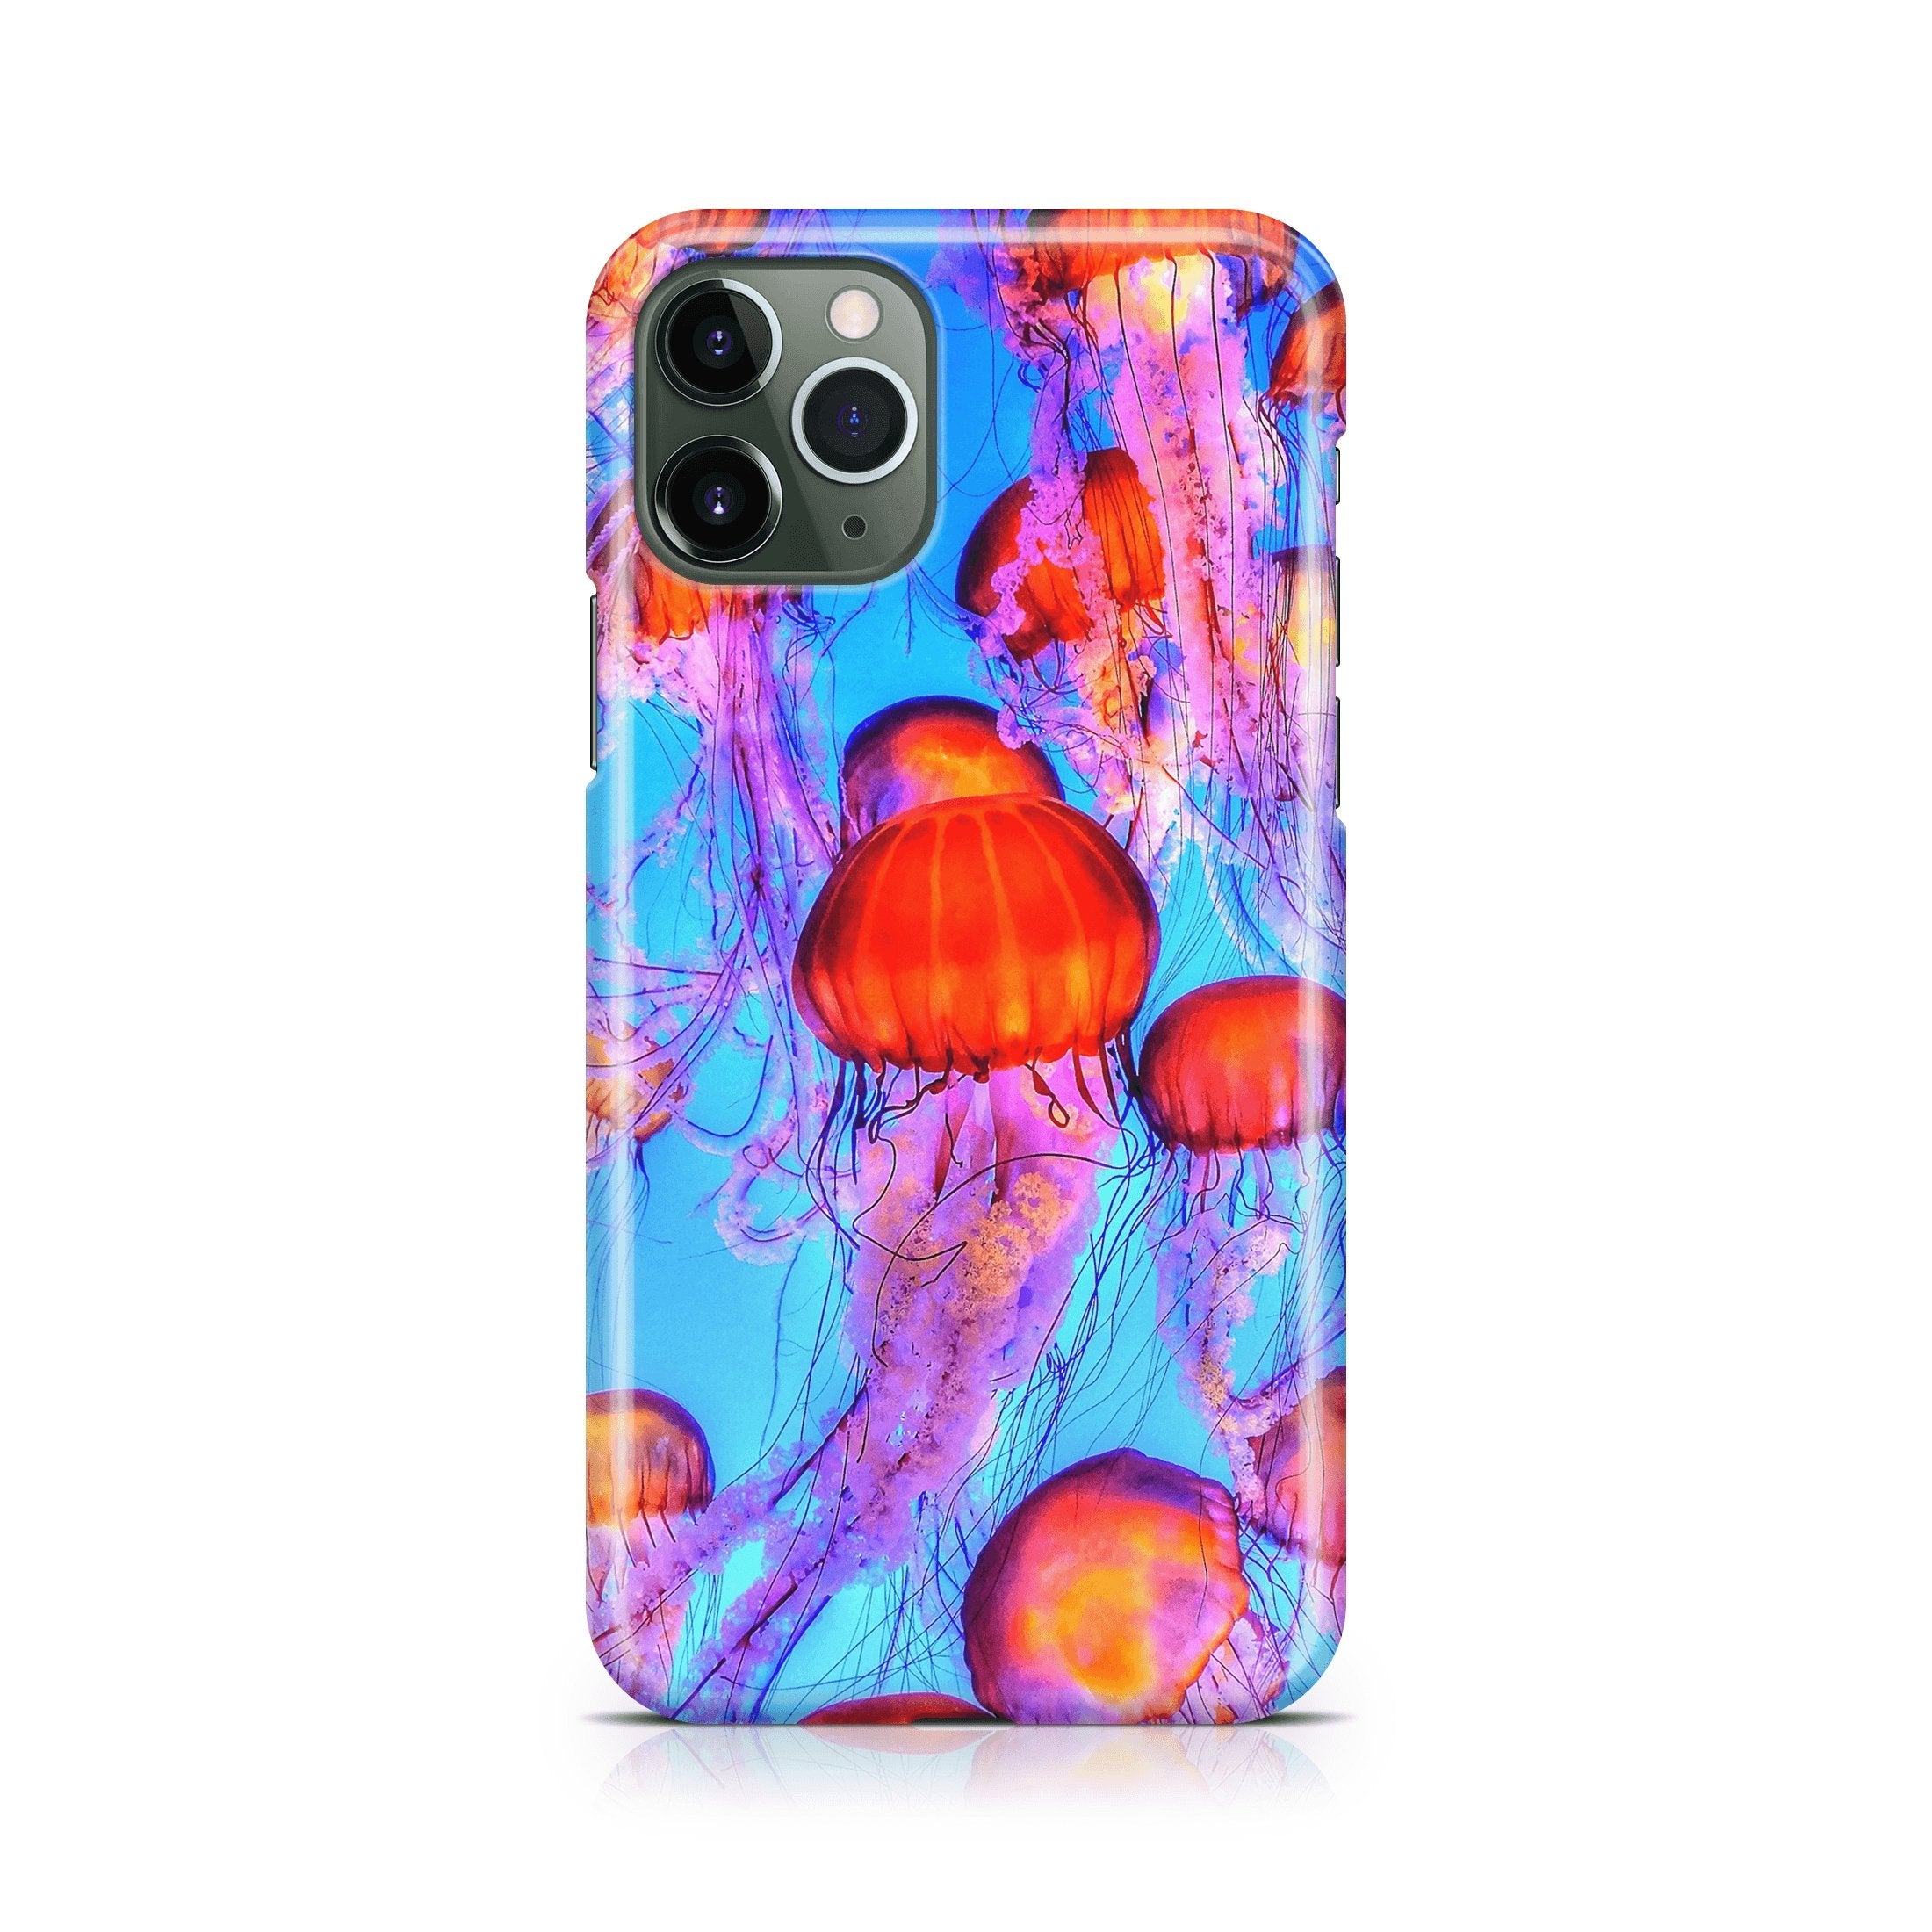 Jellyfish - iPhone phone case designs by CaseSwagger